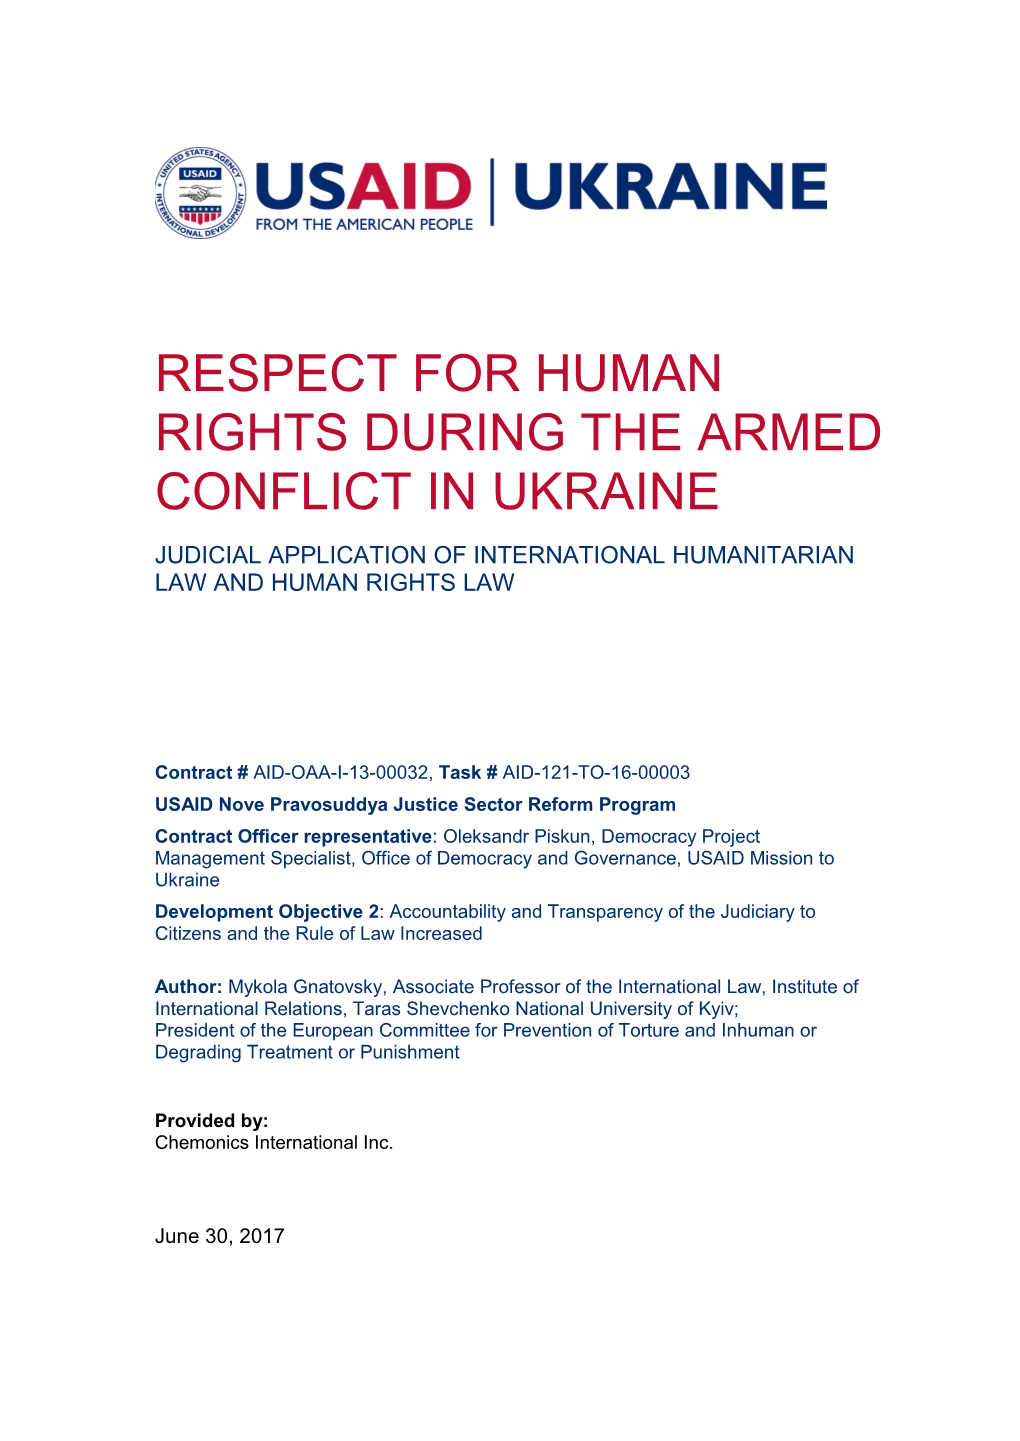 Respect for Human Rights During the Armed Conflict in Ukraine